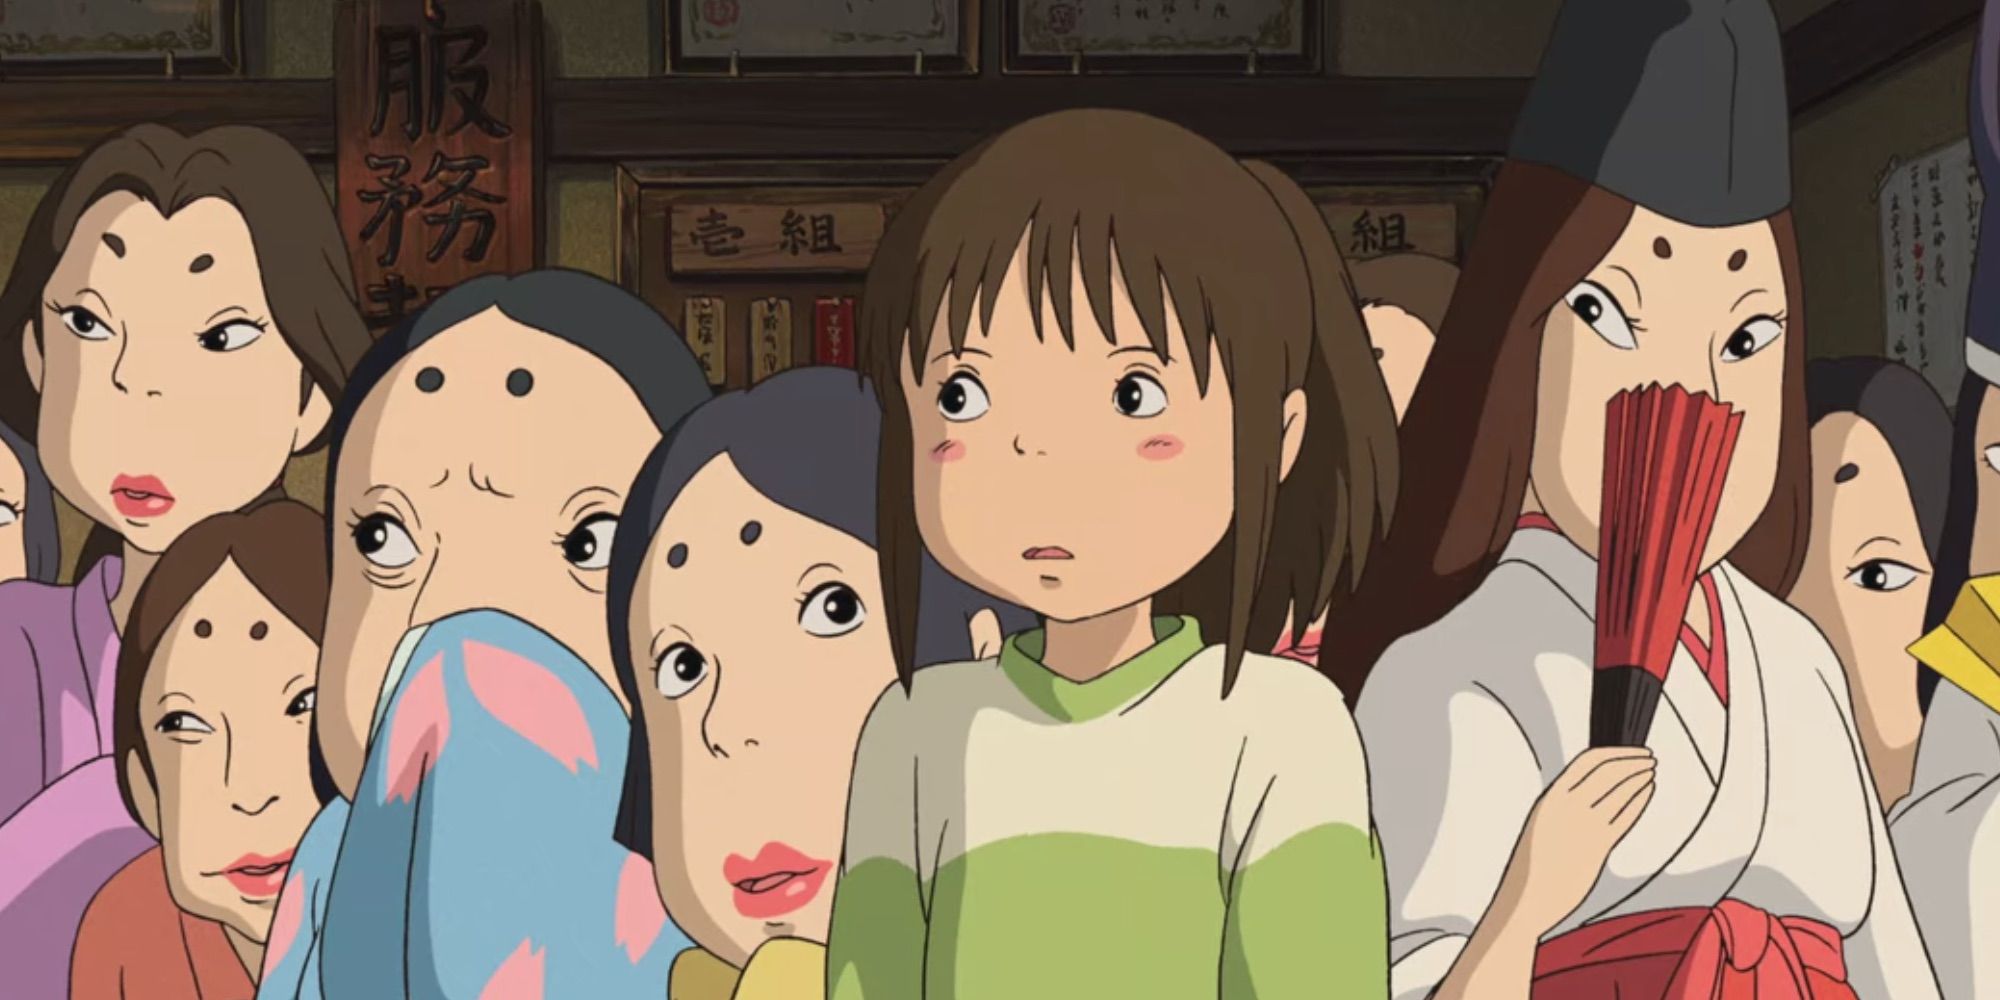 The bathhouse workers look at Chihiro warily in Spirited Away